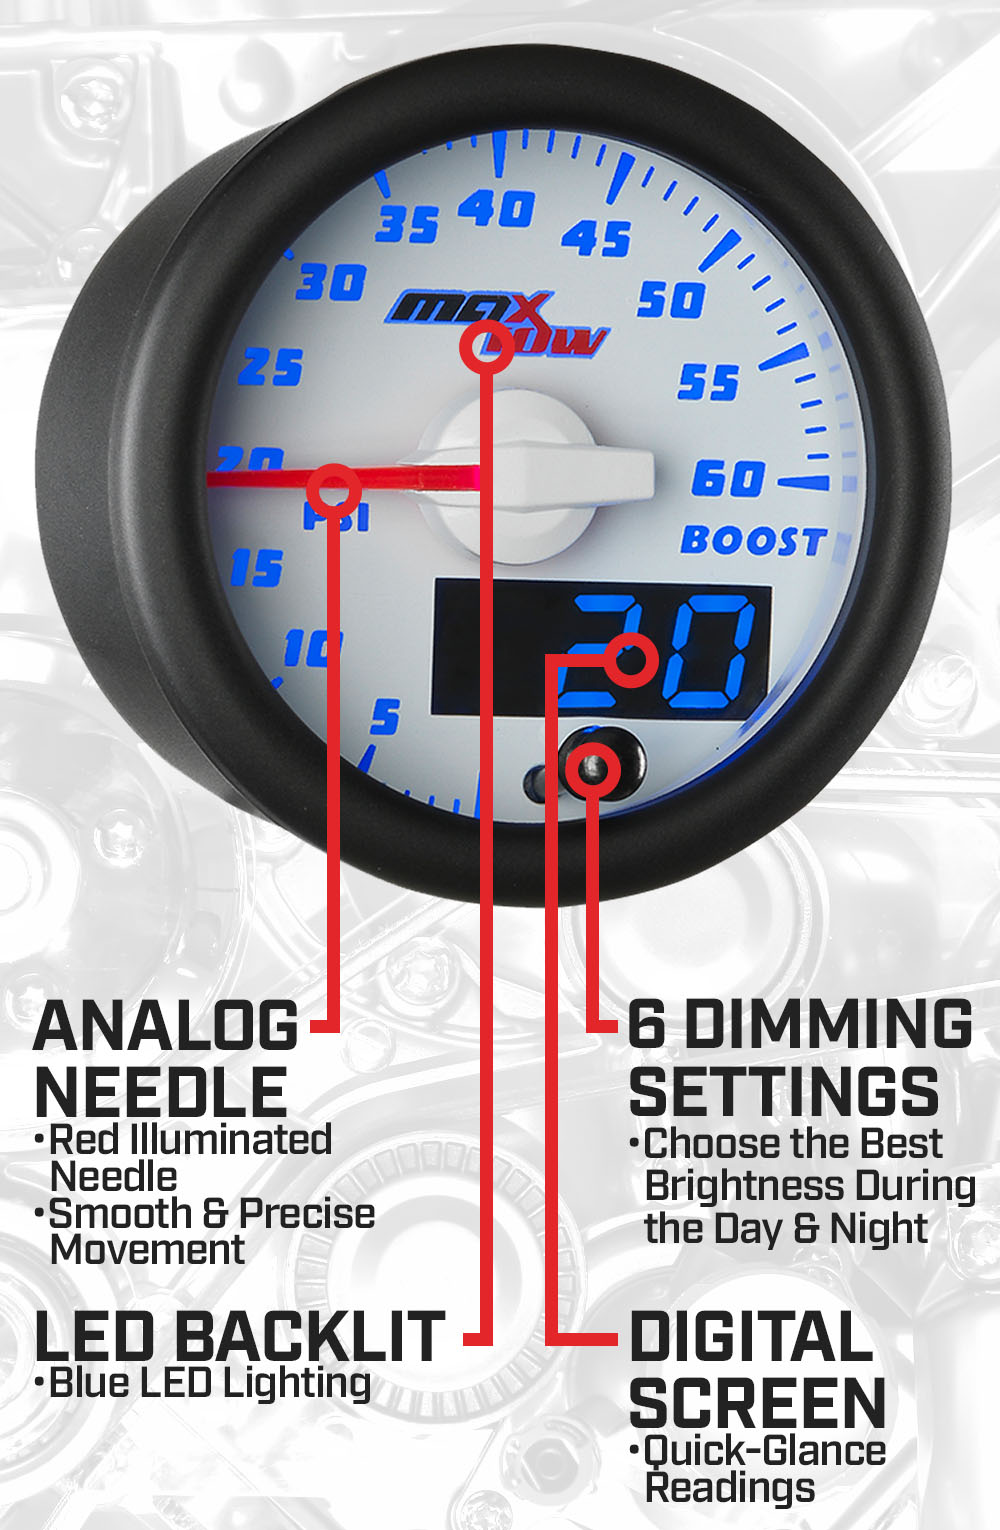 White & Blue Double Vision 60 PSI Boost Gauge Features